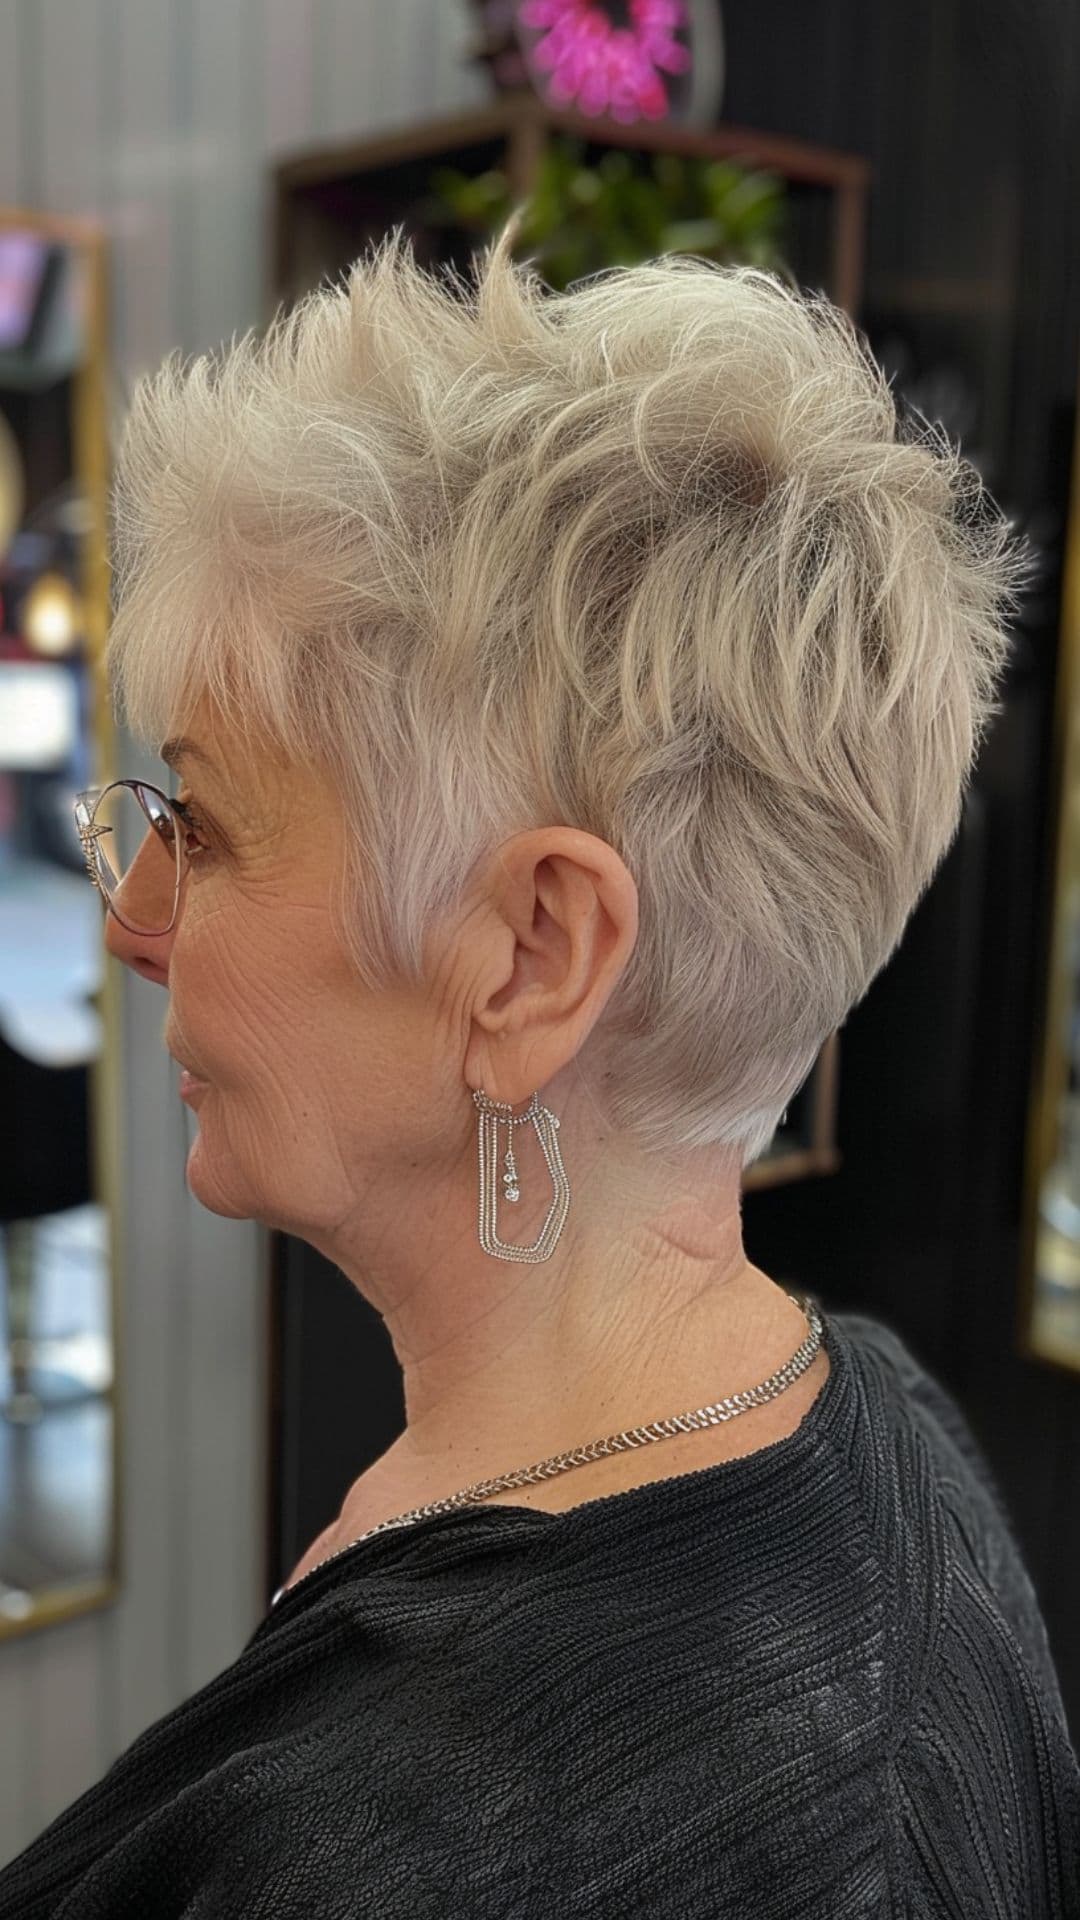 An older woman modelling a classic pixie cut.